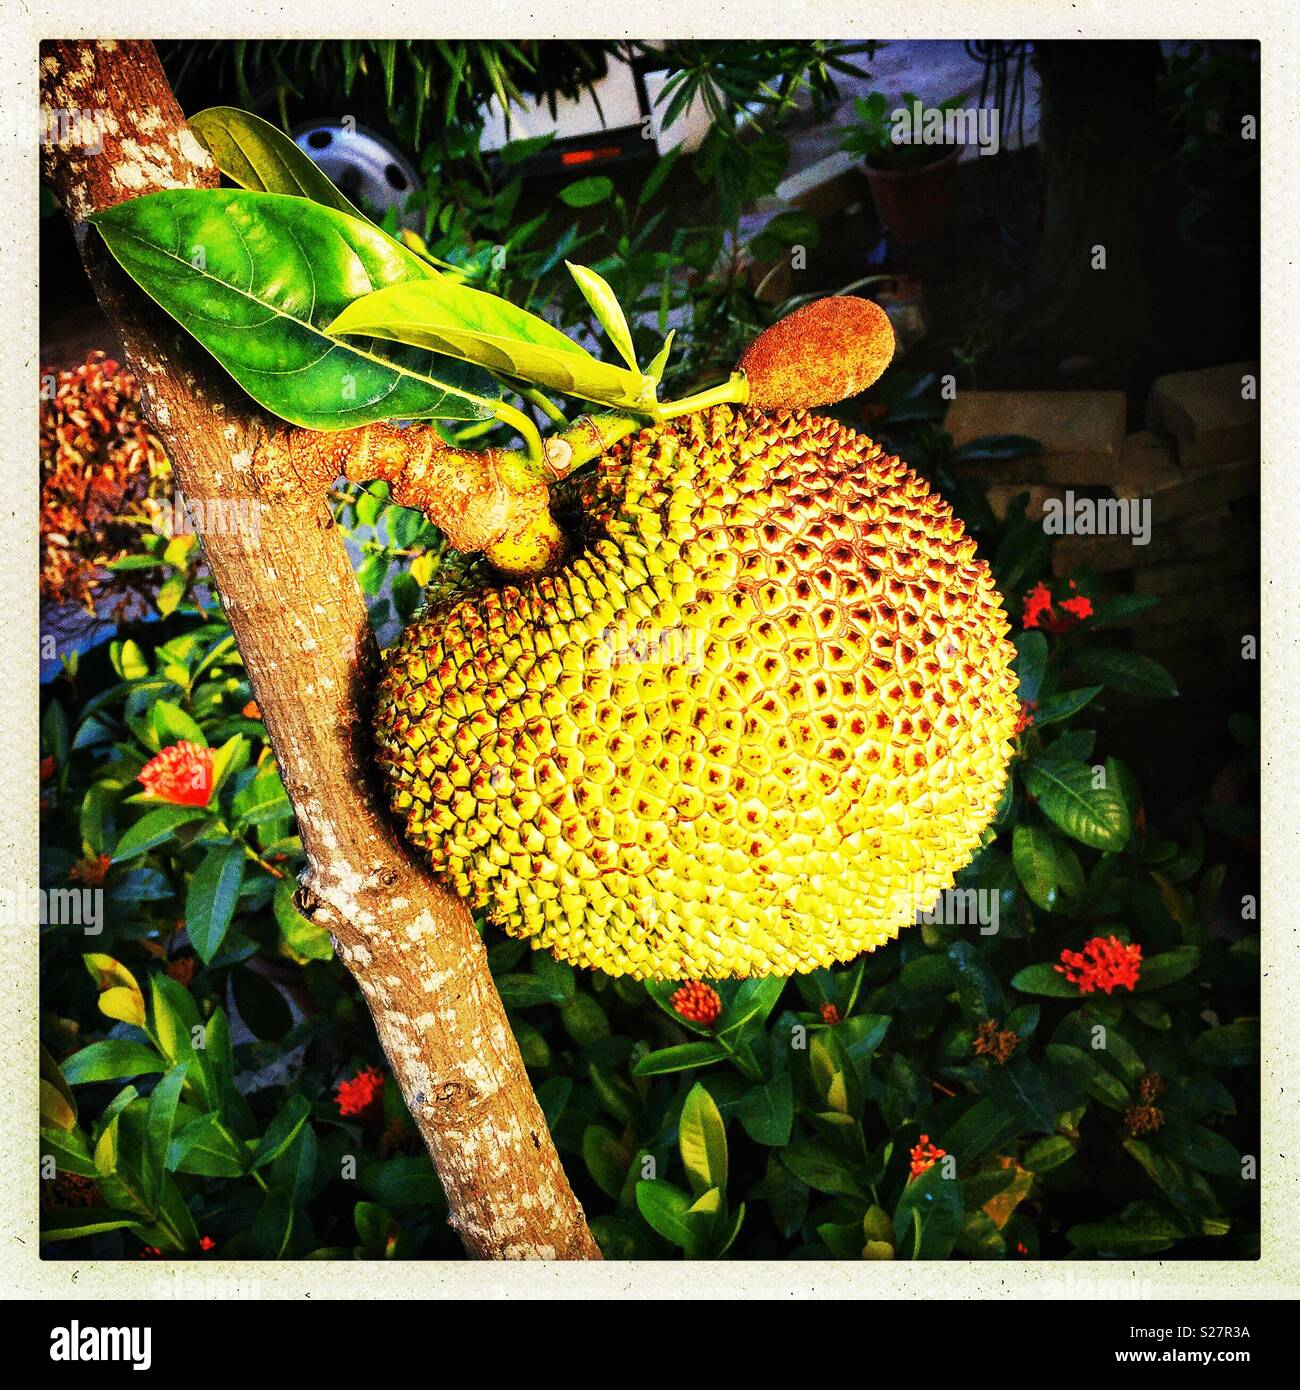 A young jackfruit tree growing in a nursery in the New Territories, Hong Kong Stock Photo